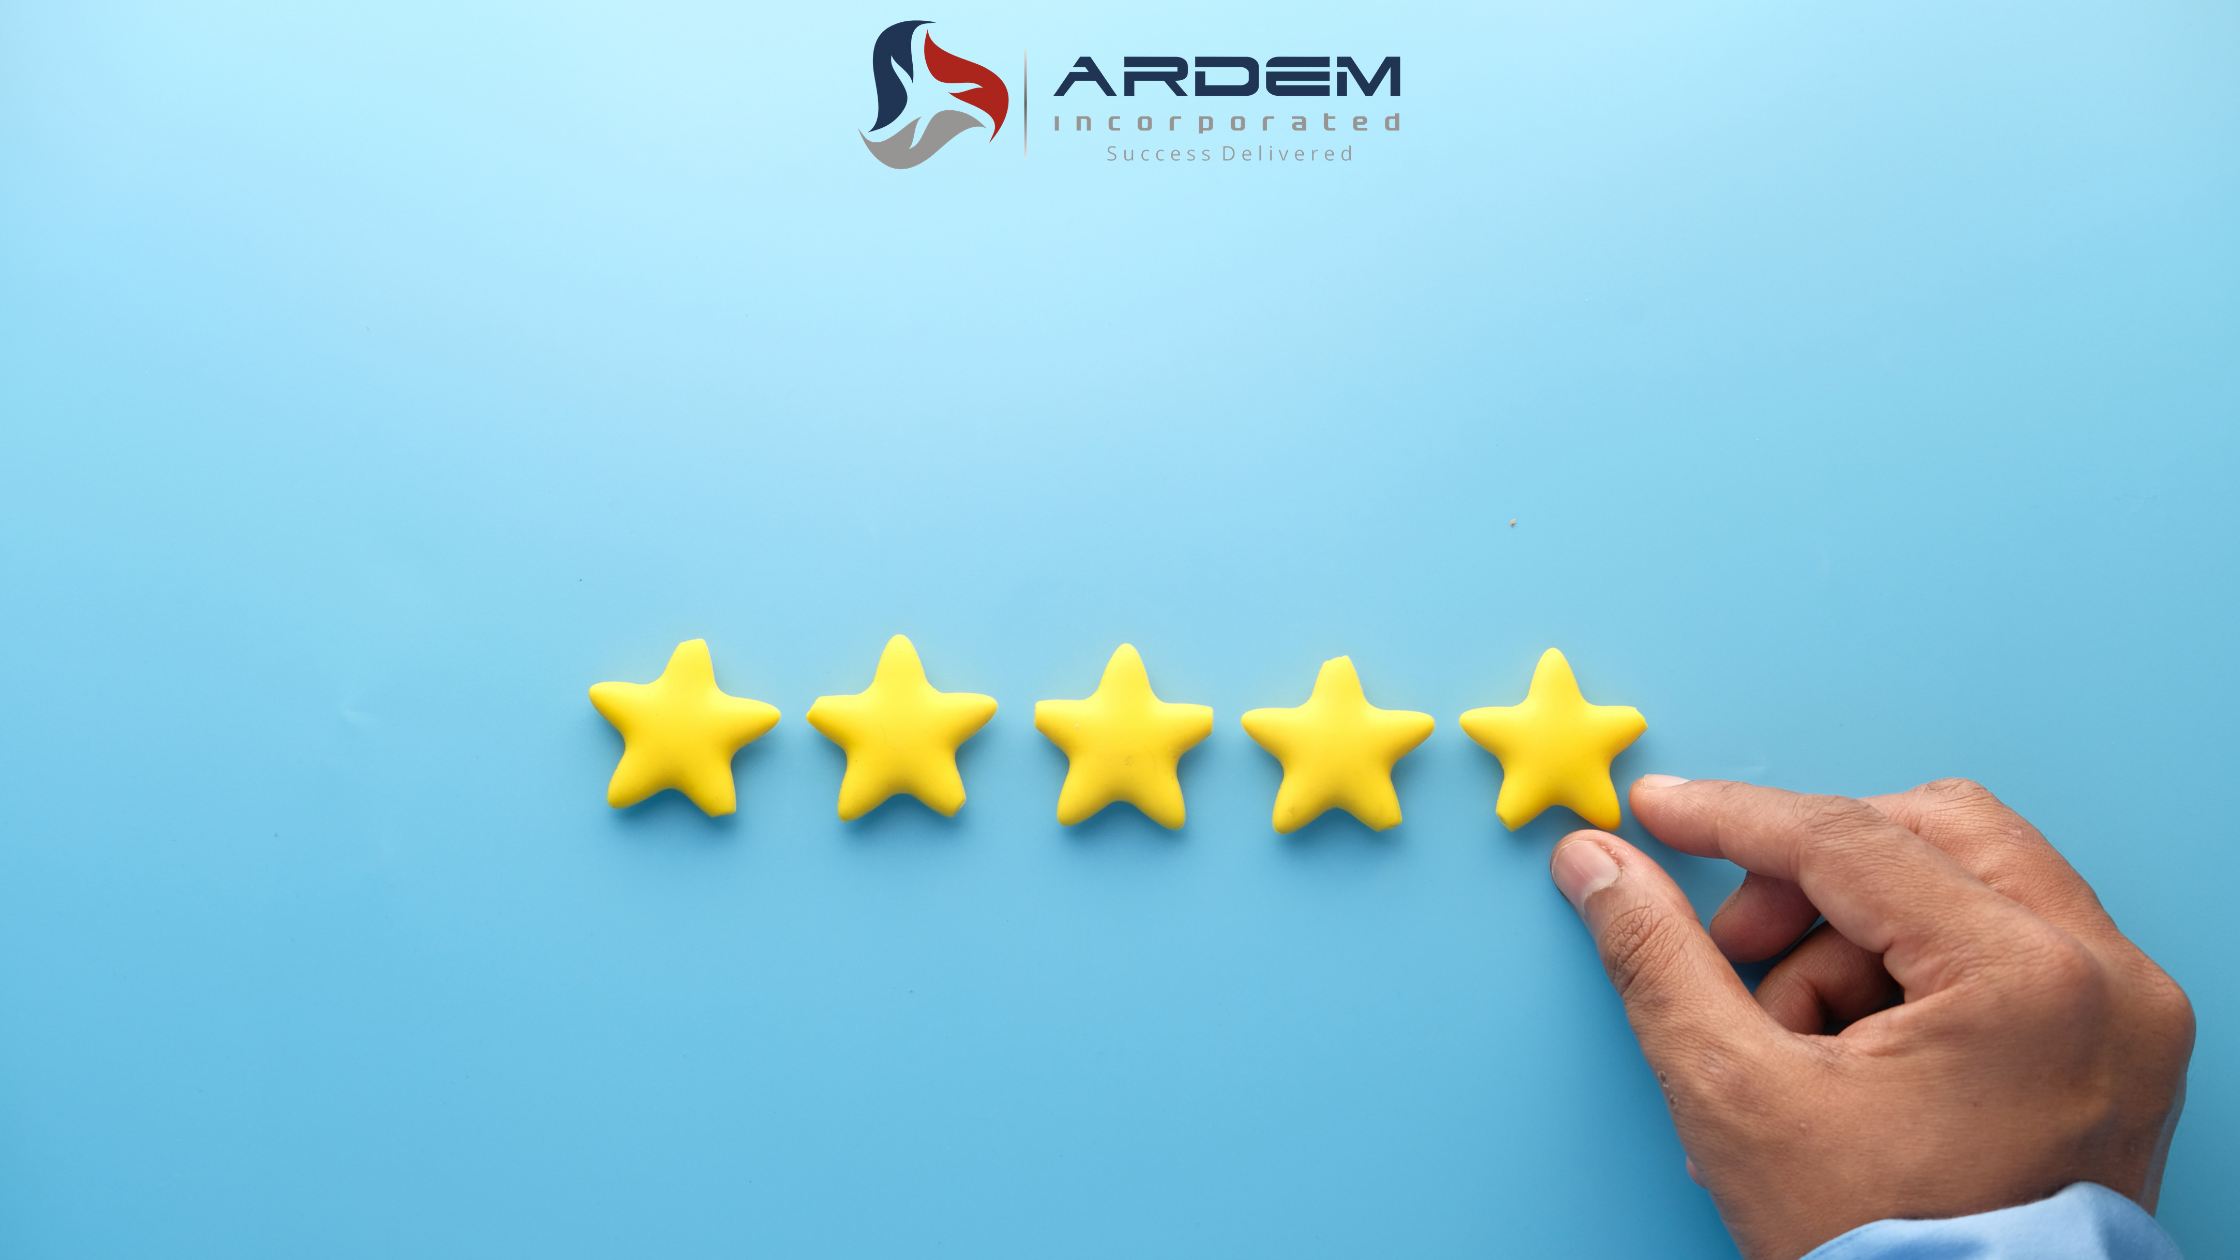 ARDEM ranks among the top data entry services in 2021.